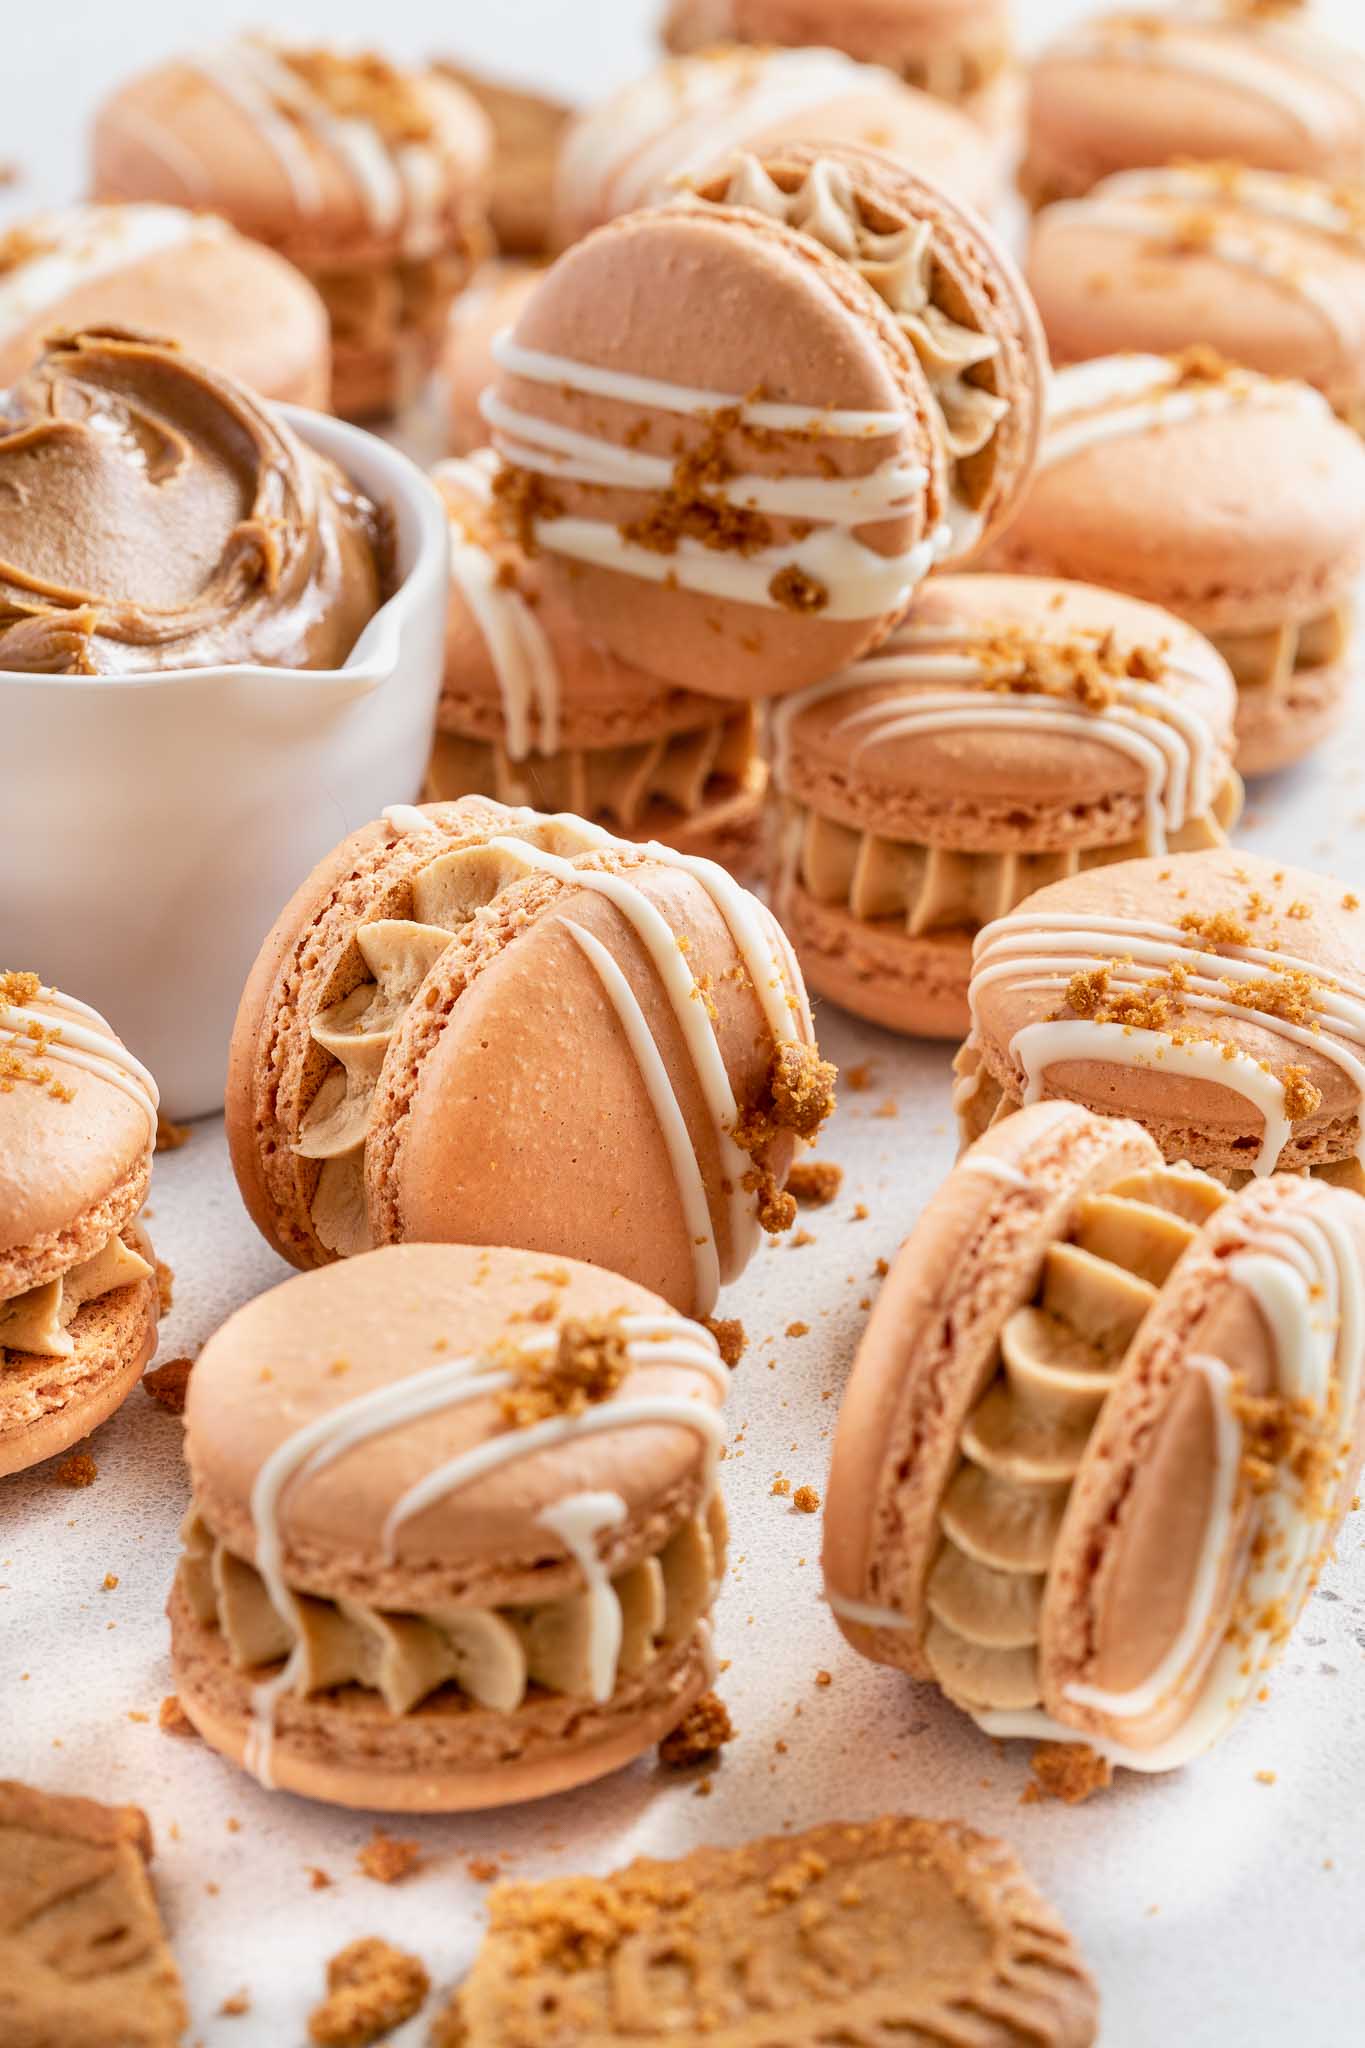 French macarons filled with biscoff buttercream